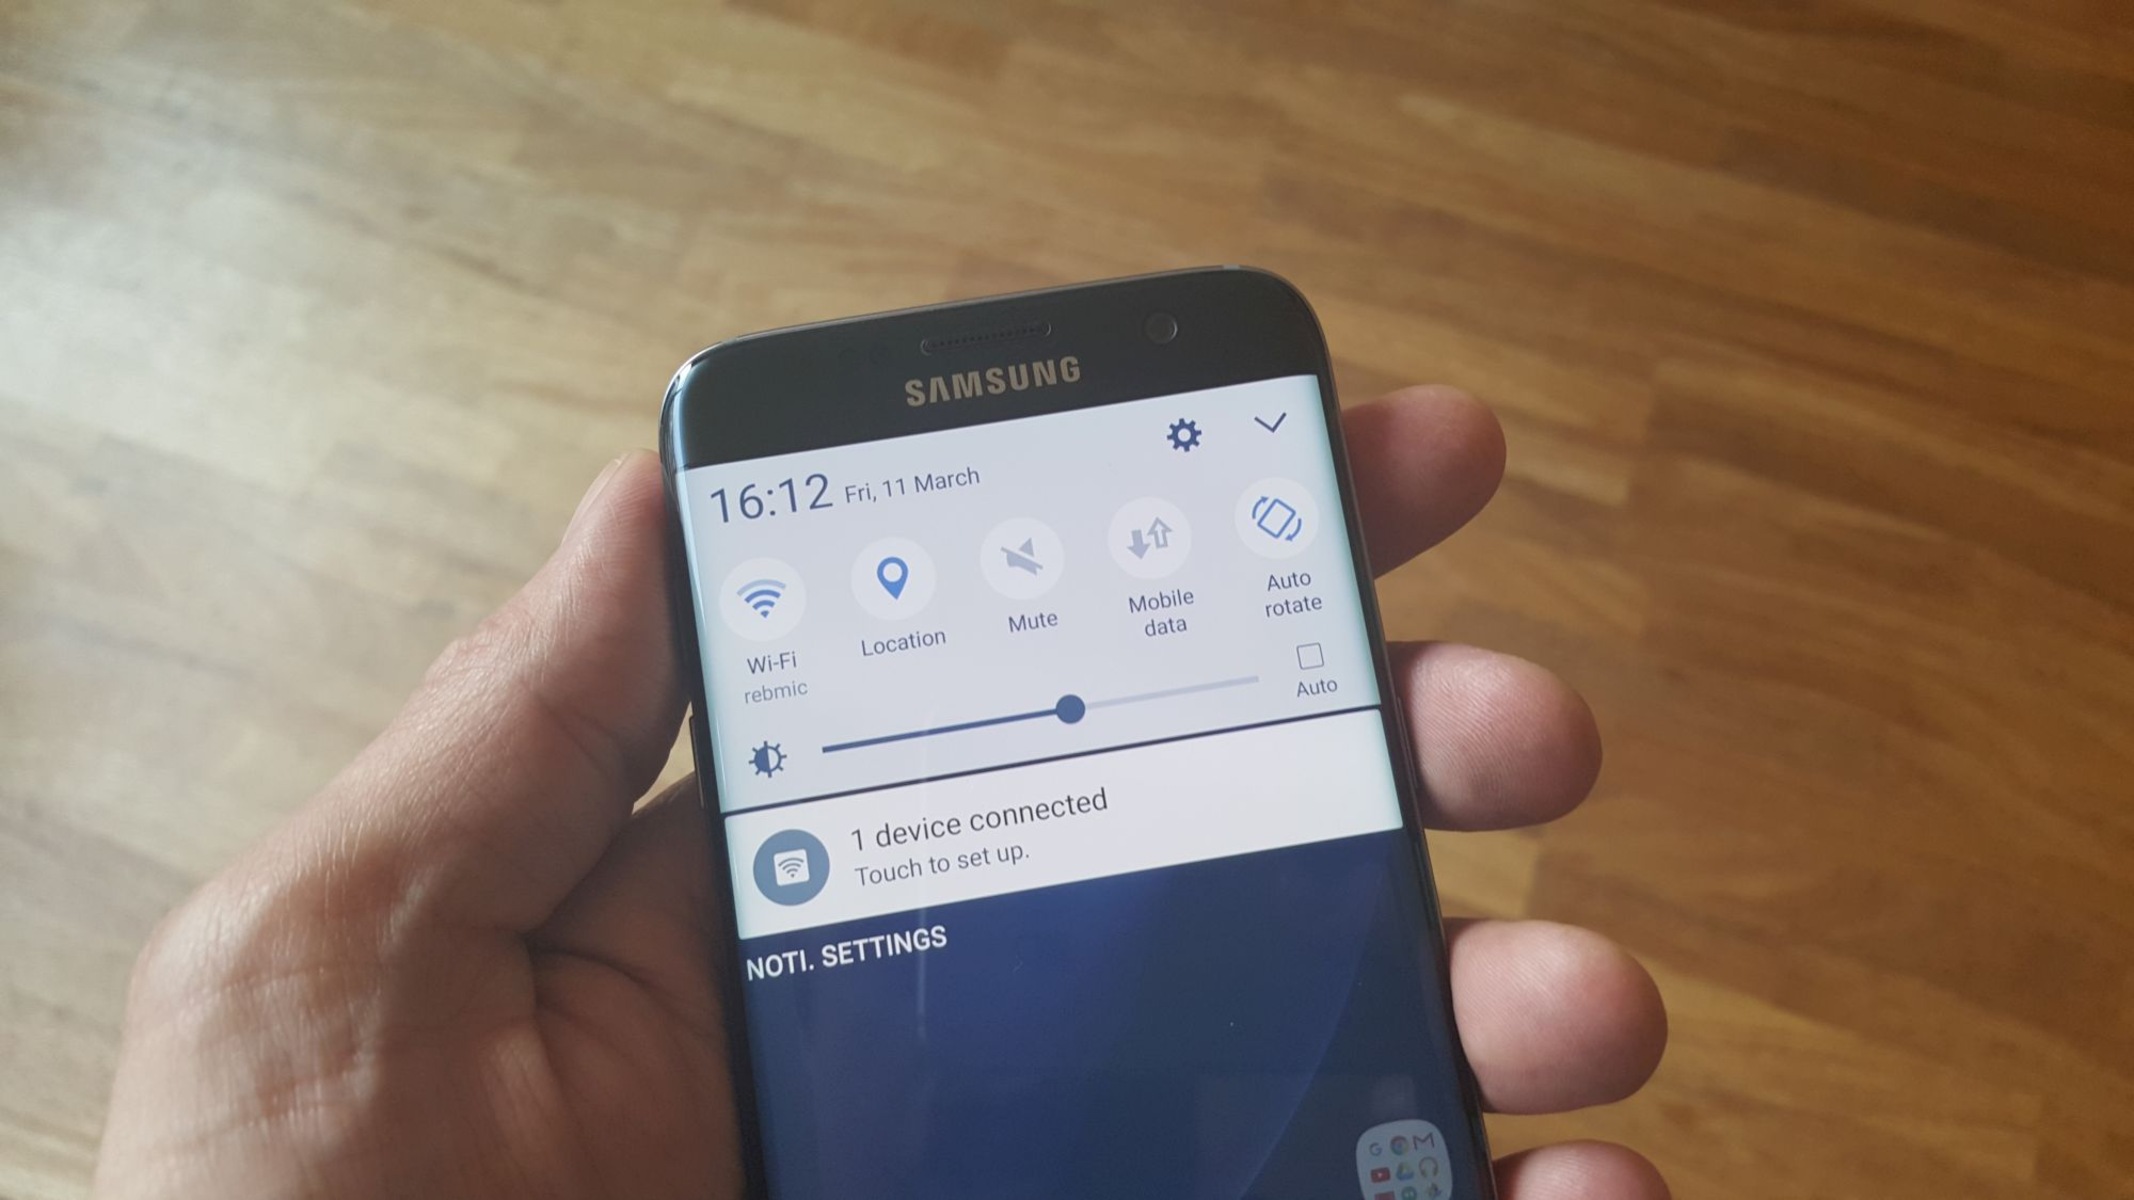 How To Disable Auto Network Switch On Samsung S7